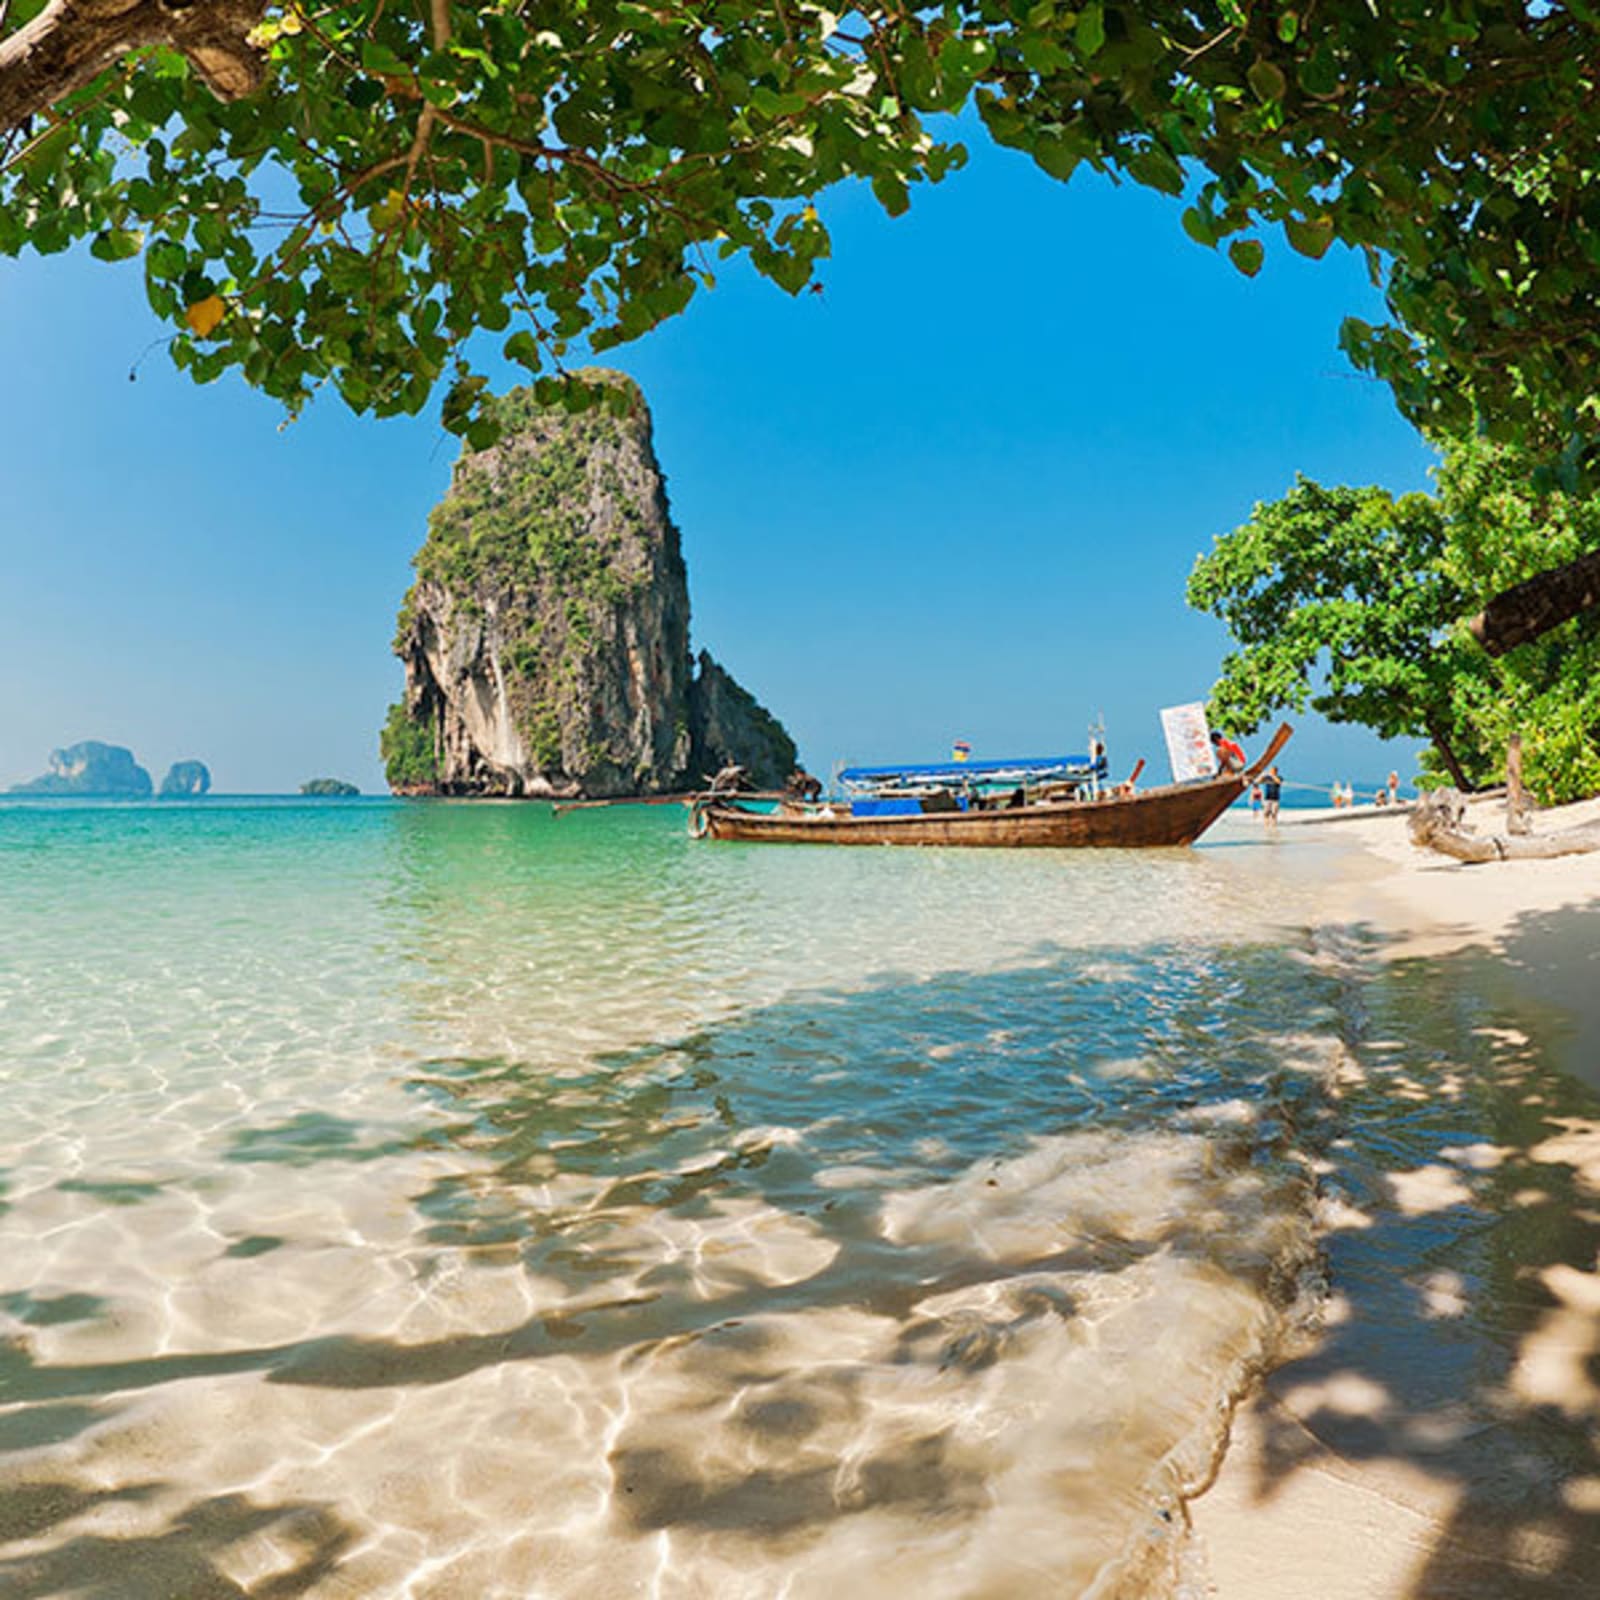 Small boat docked on a beach in Thailand, with a large rock jutting out of the ocean behind